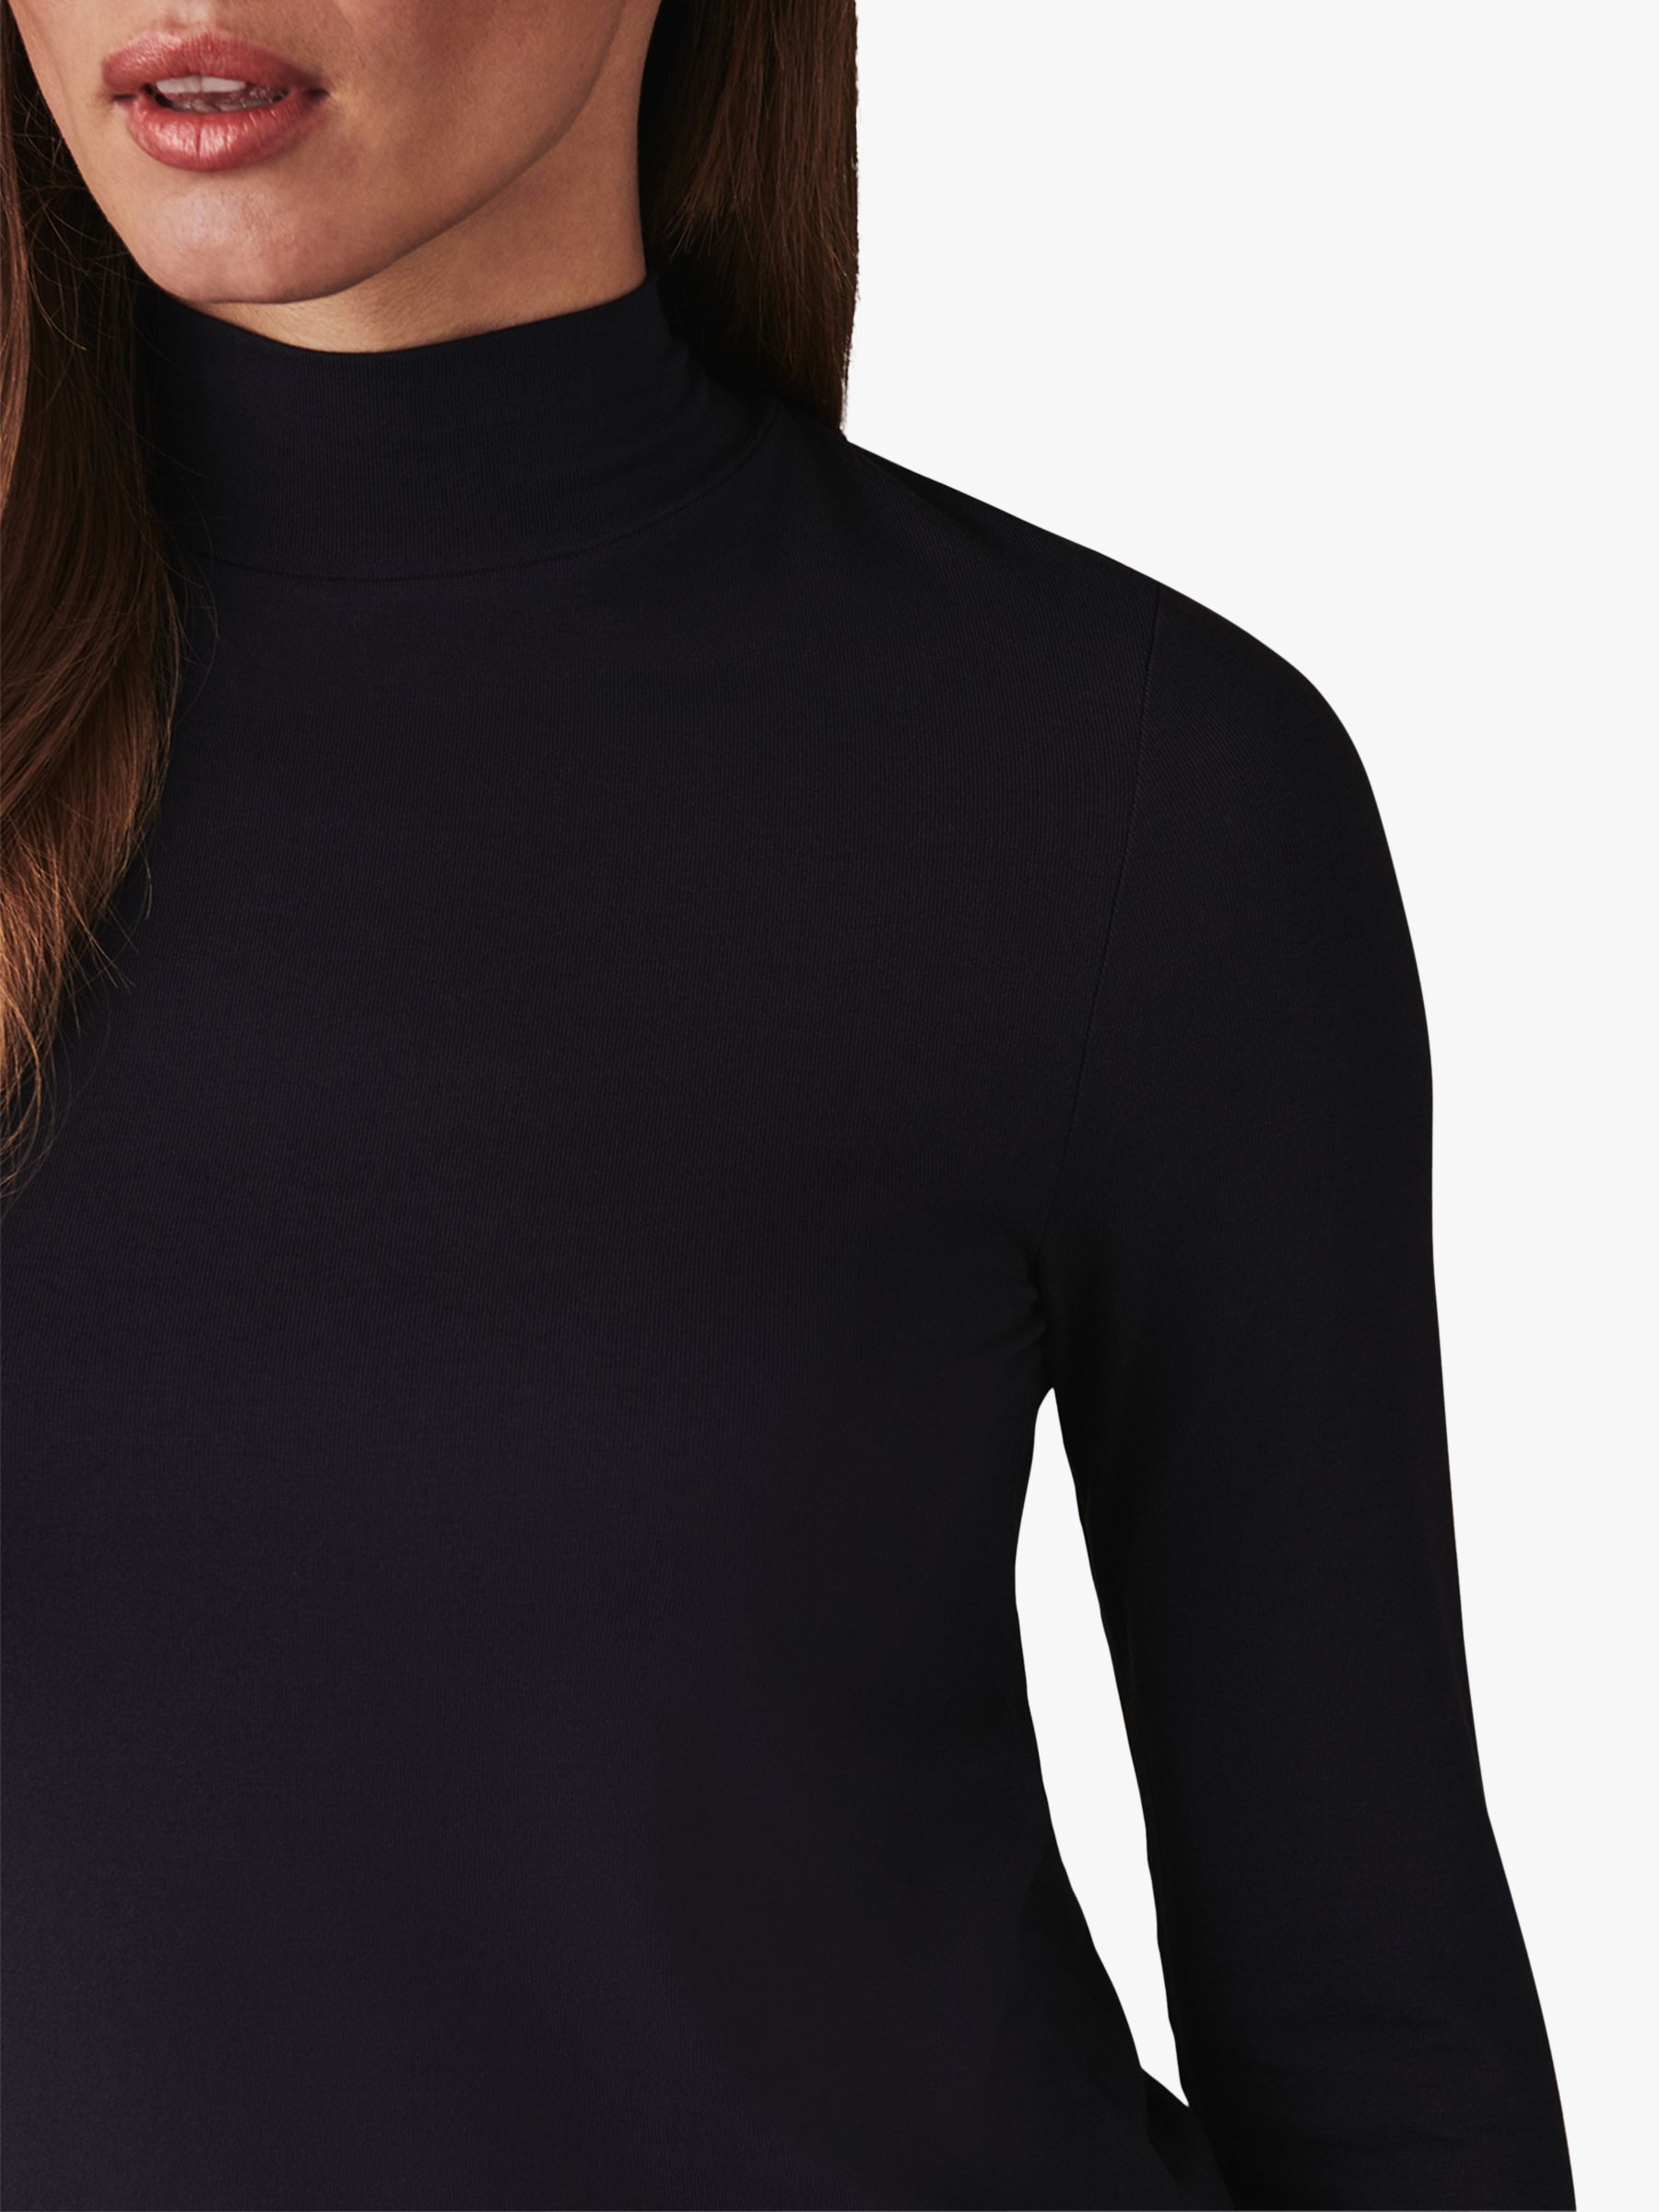 Crew Clothing Second Skin Polo Neck Top, Navy at John Lewis & Partners